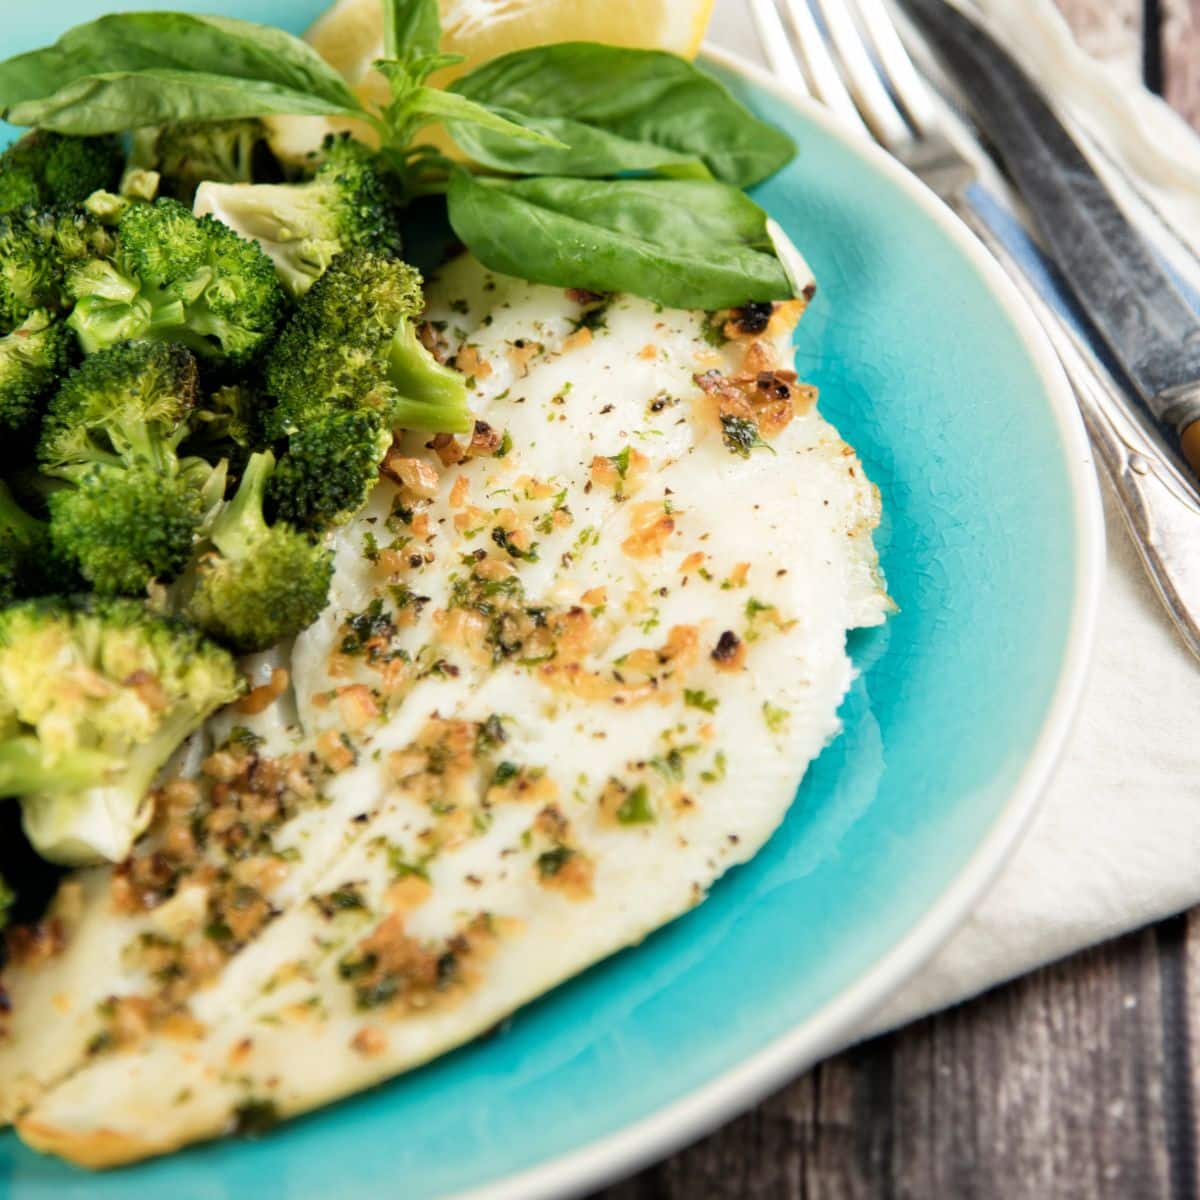 Broiled Halibut with Broccoli and Toasted Garlic on a blue plate.